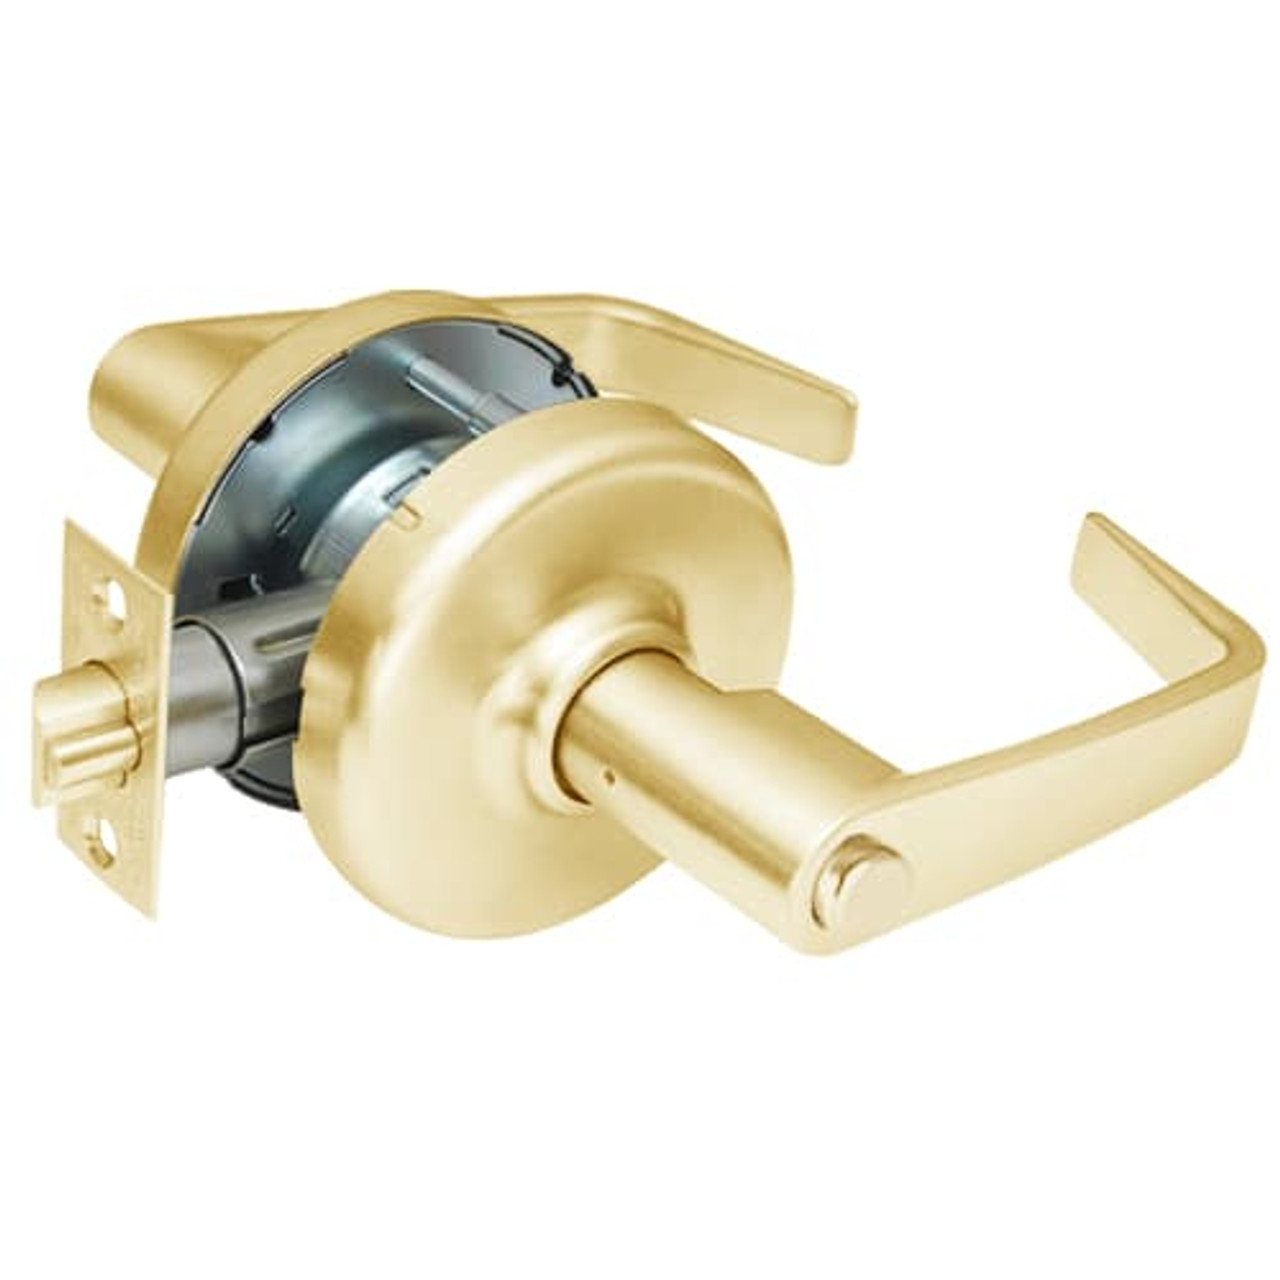 CL3520-NZD-605 Corbin CL3500 Series Heavy Duty Privacy Cylindrical Locksets with Newport Lever in Bright Brass Finish